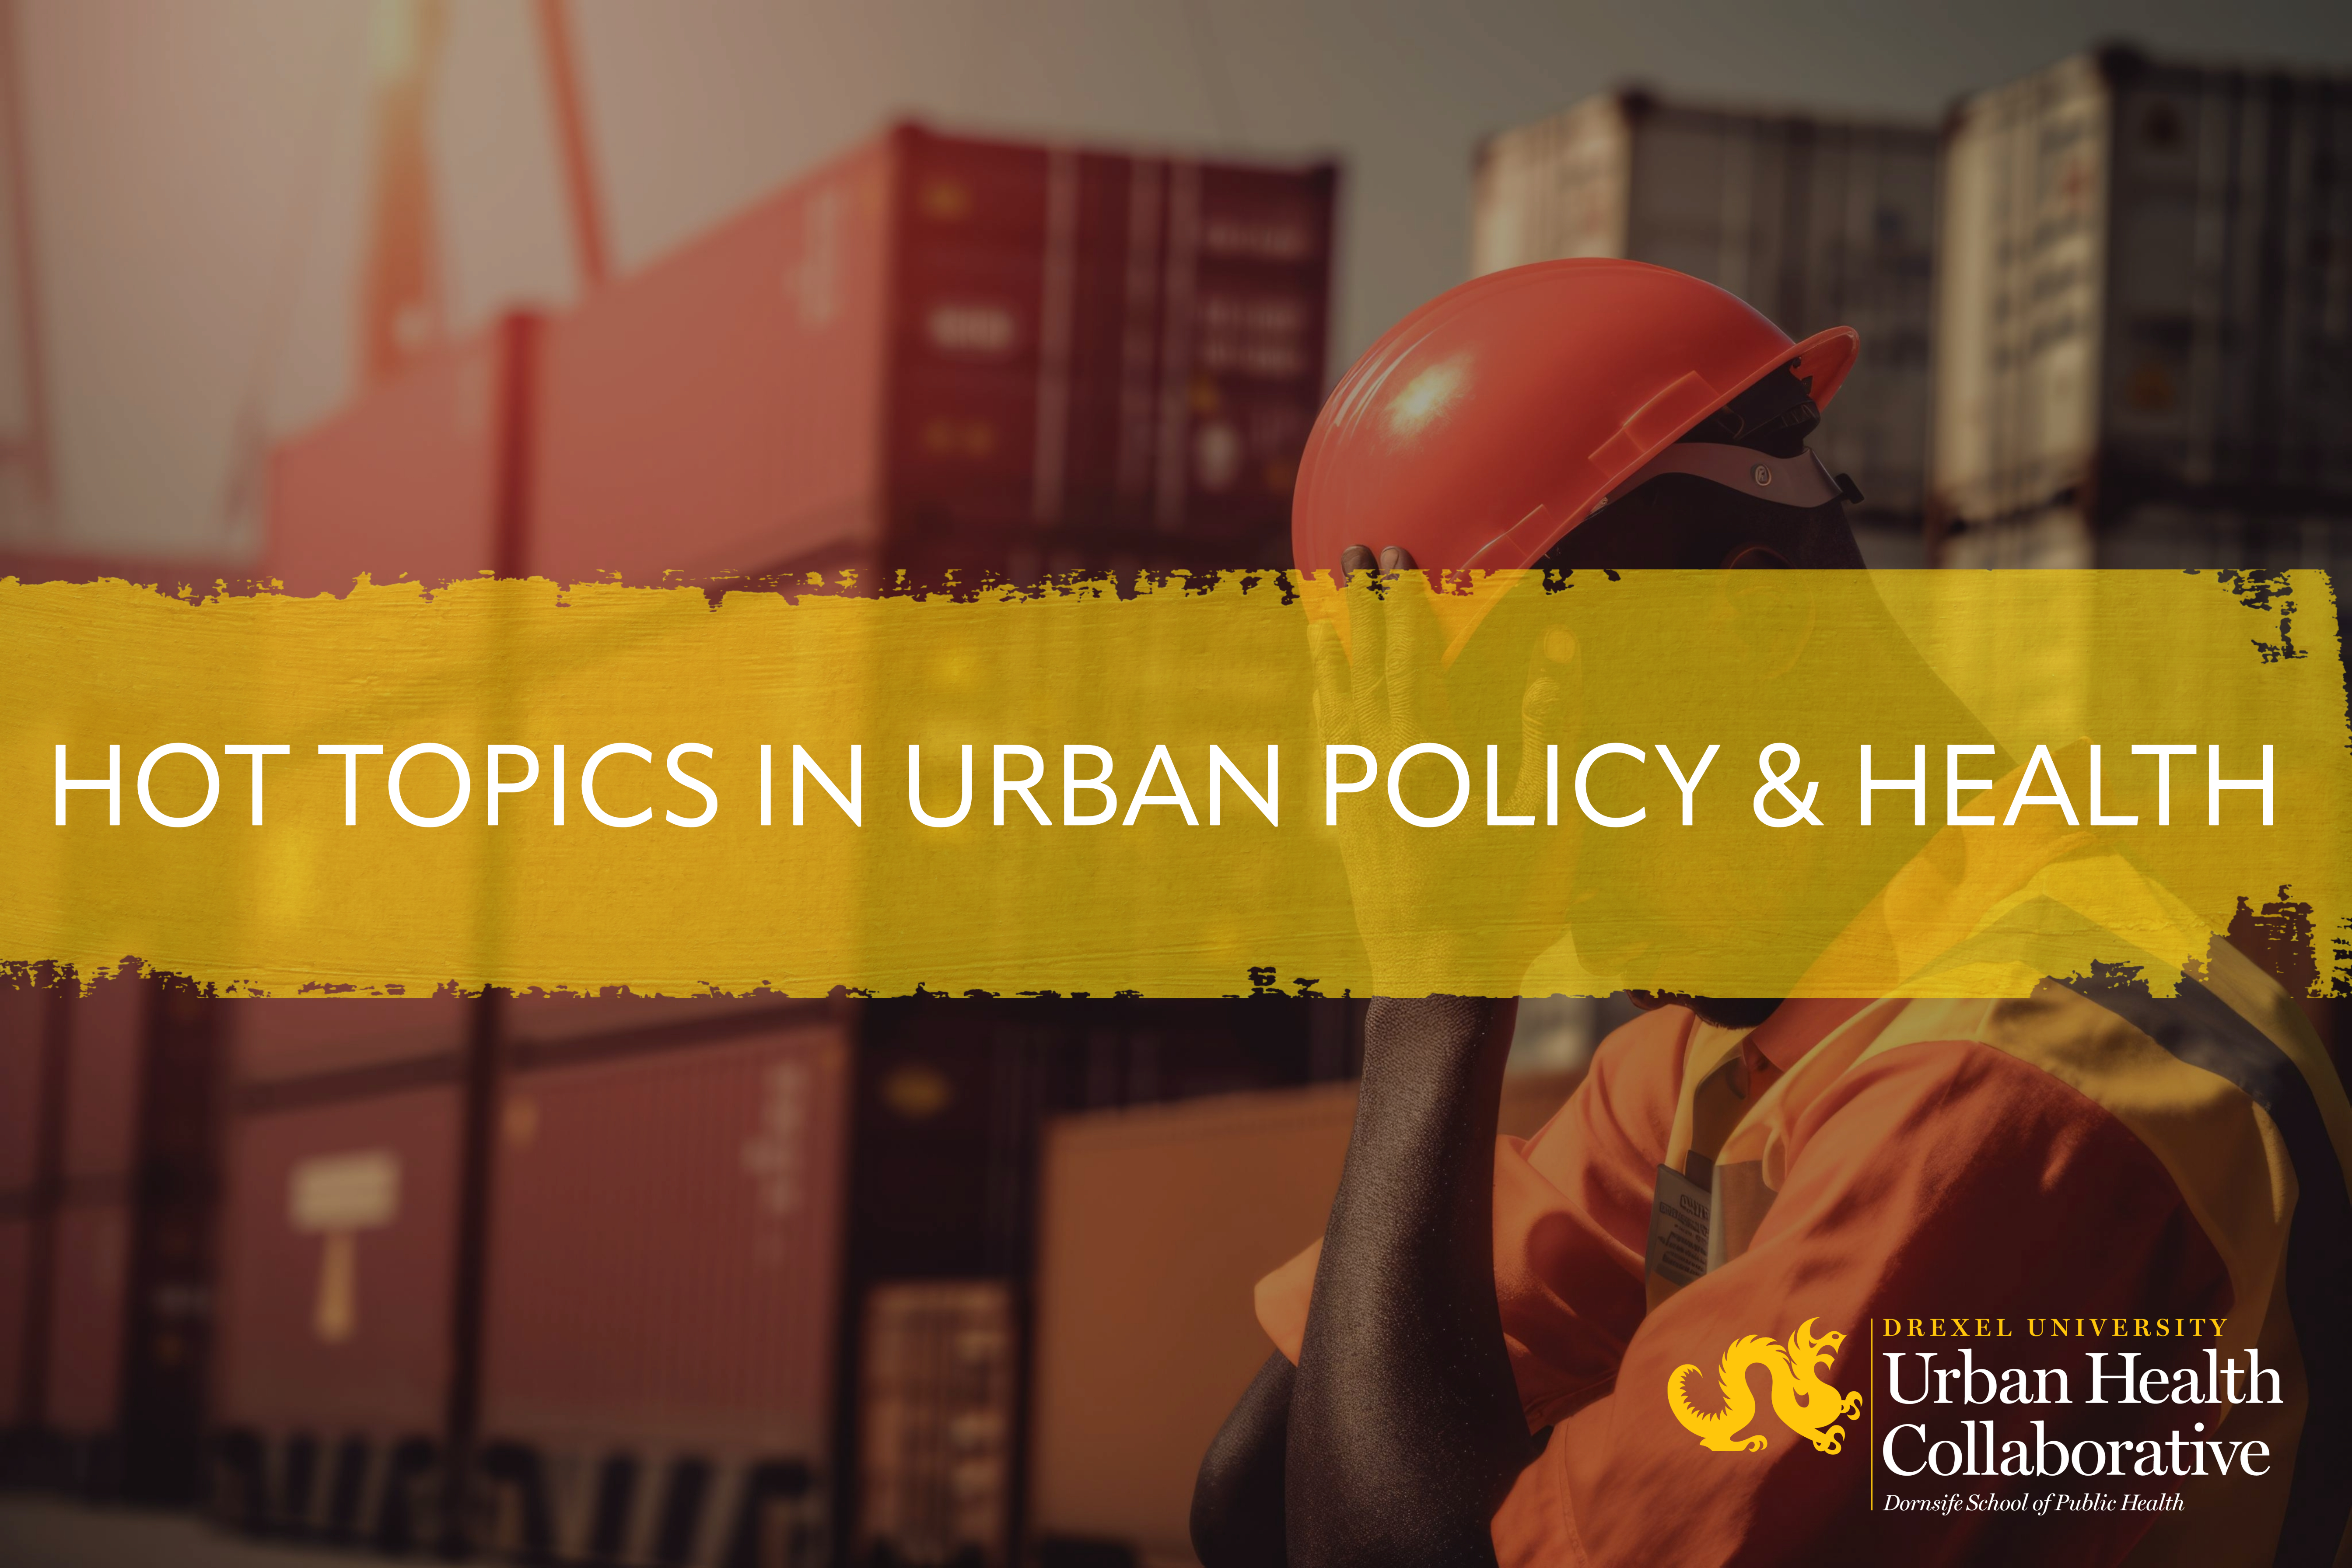 The text "Hot Topics in Urban Policy & Health" over a picture of a worker in a hard hat looking uncomfortable in heat